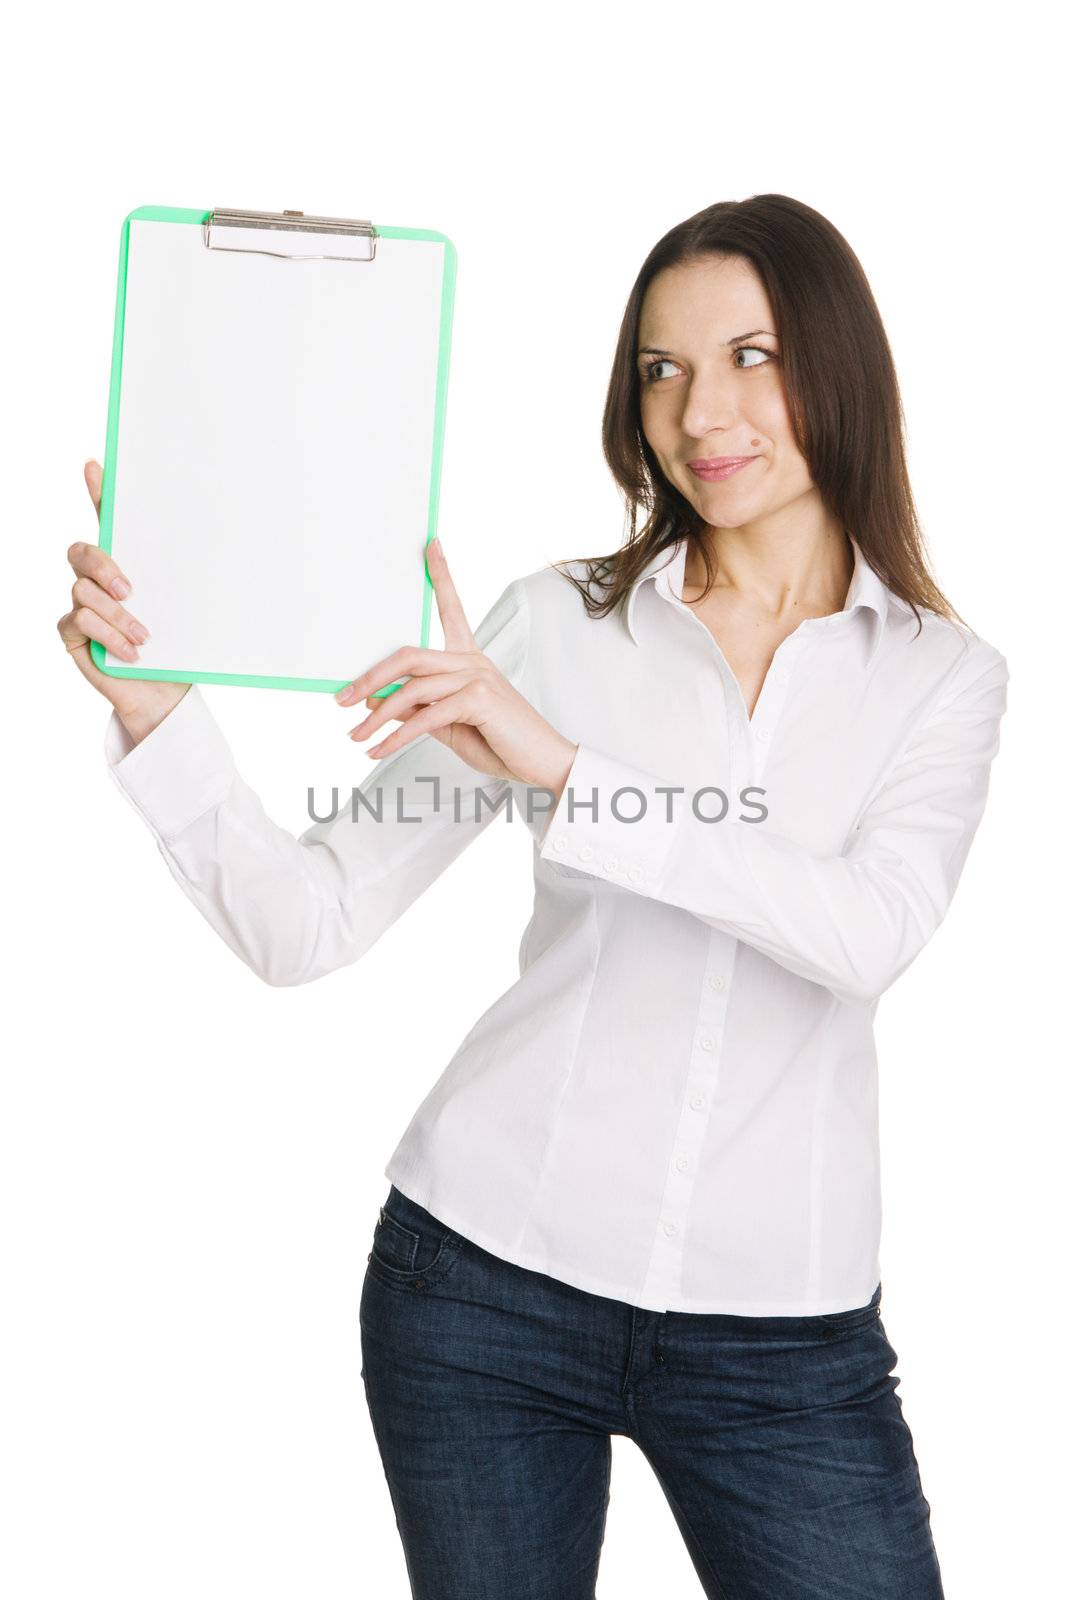 Beautiful young businesswoman with a worksheet, white background